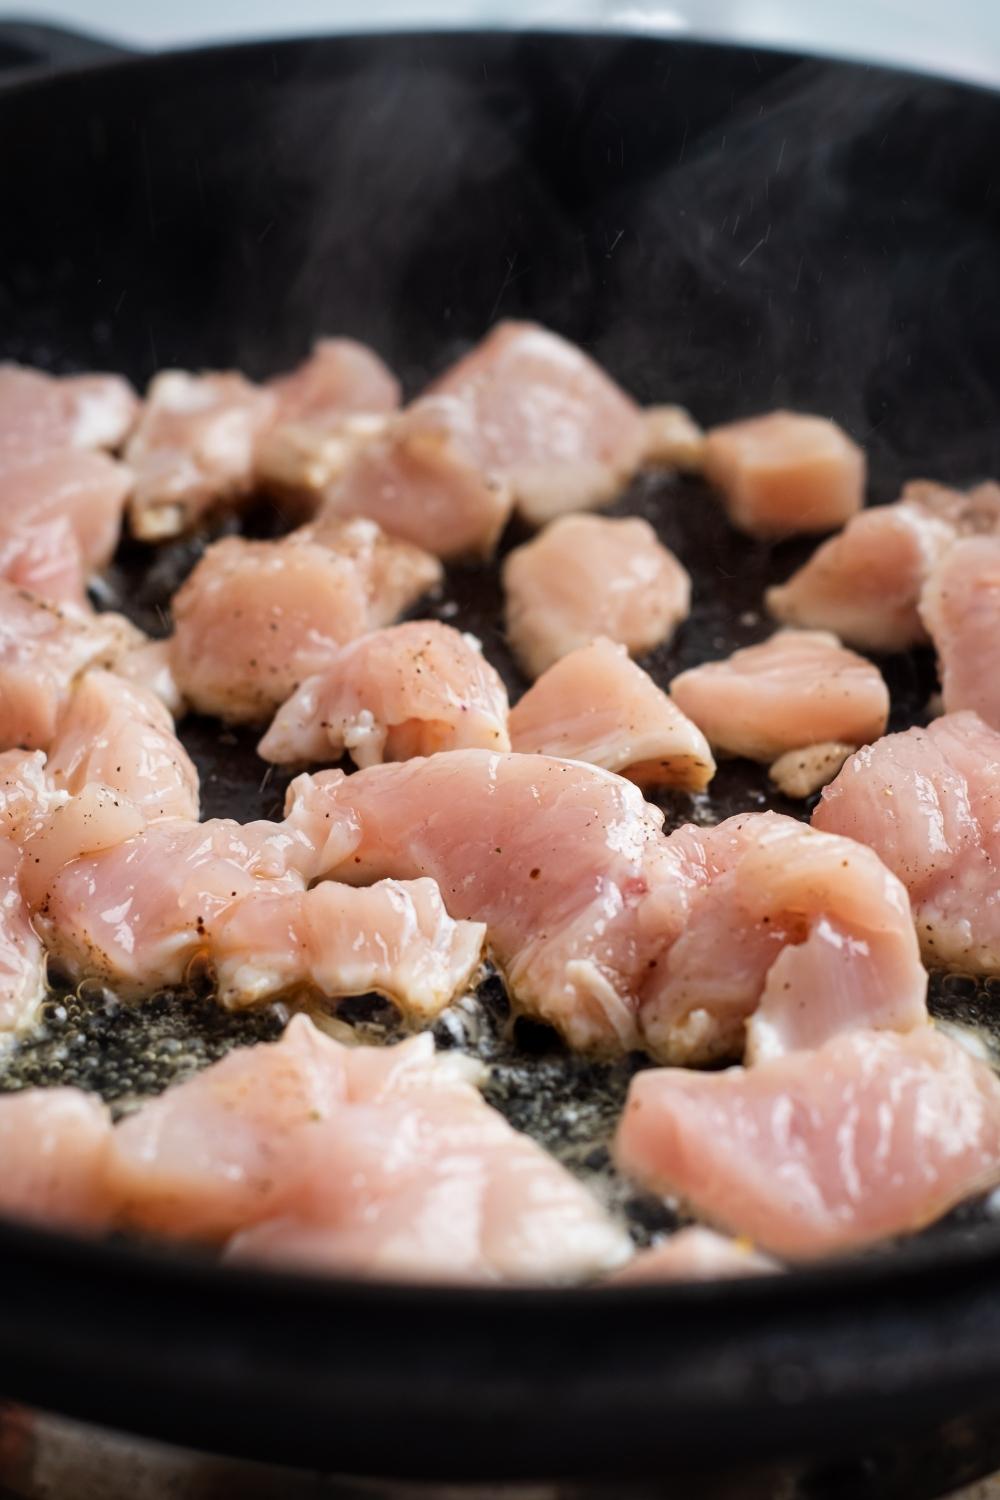 A skillet with uncooked chicken cubes.